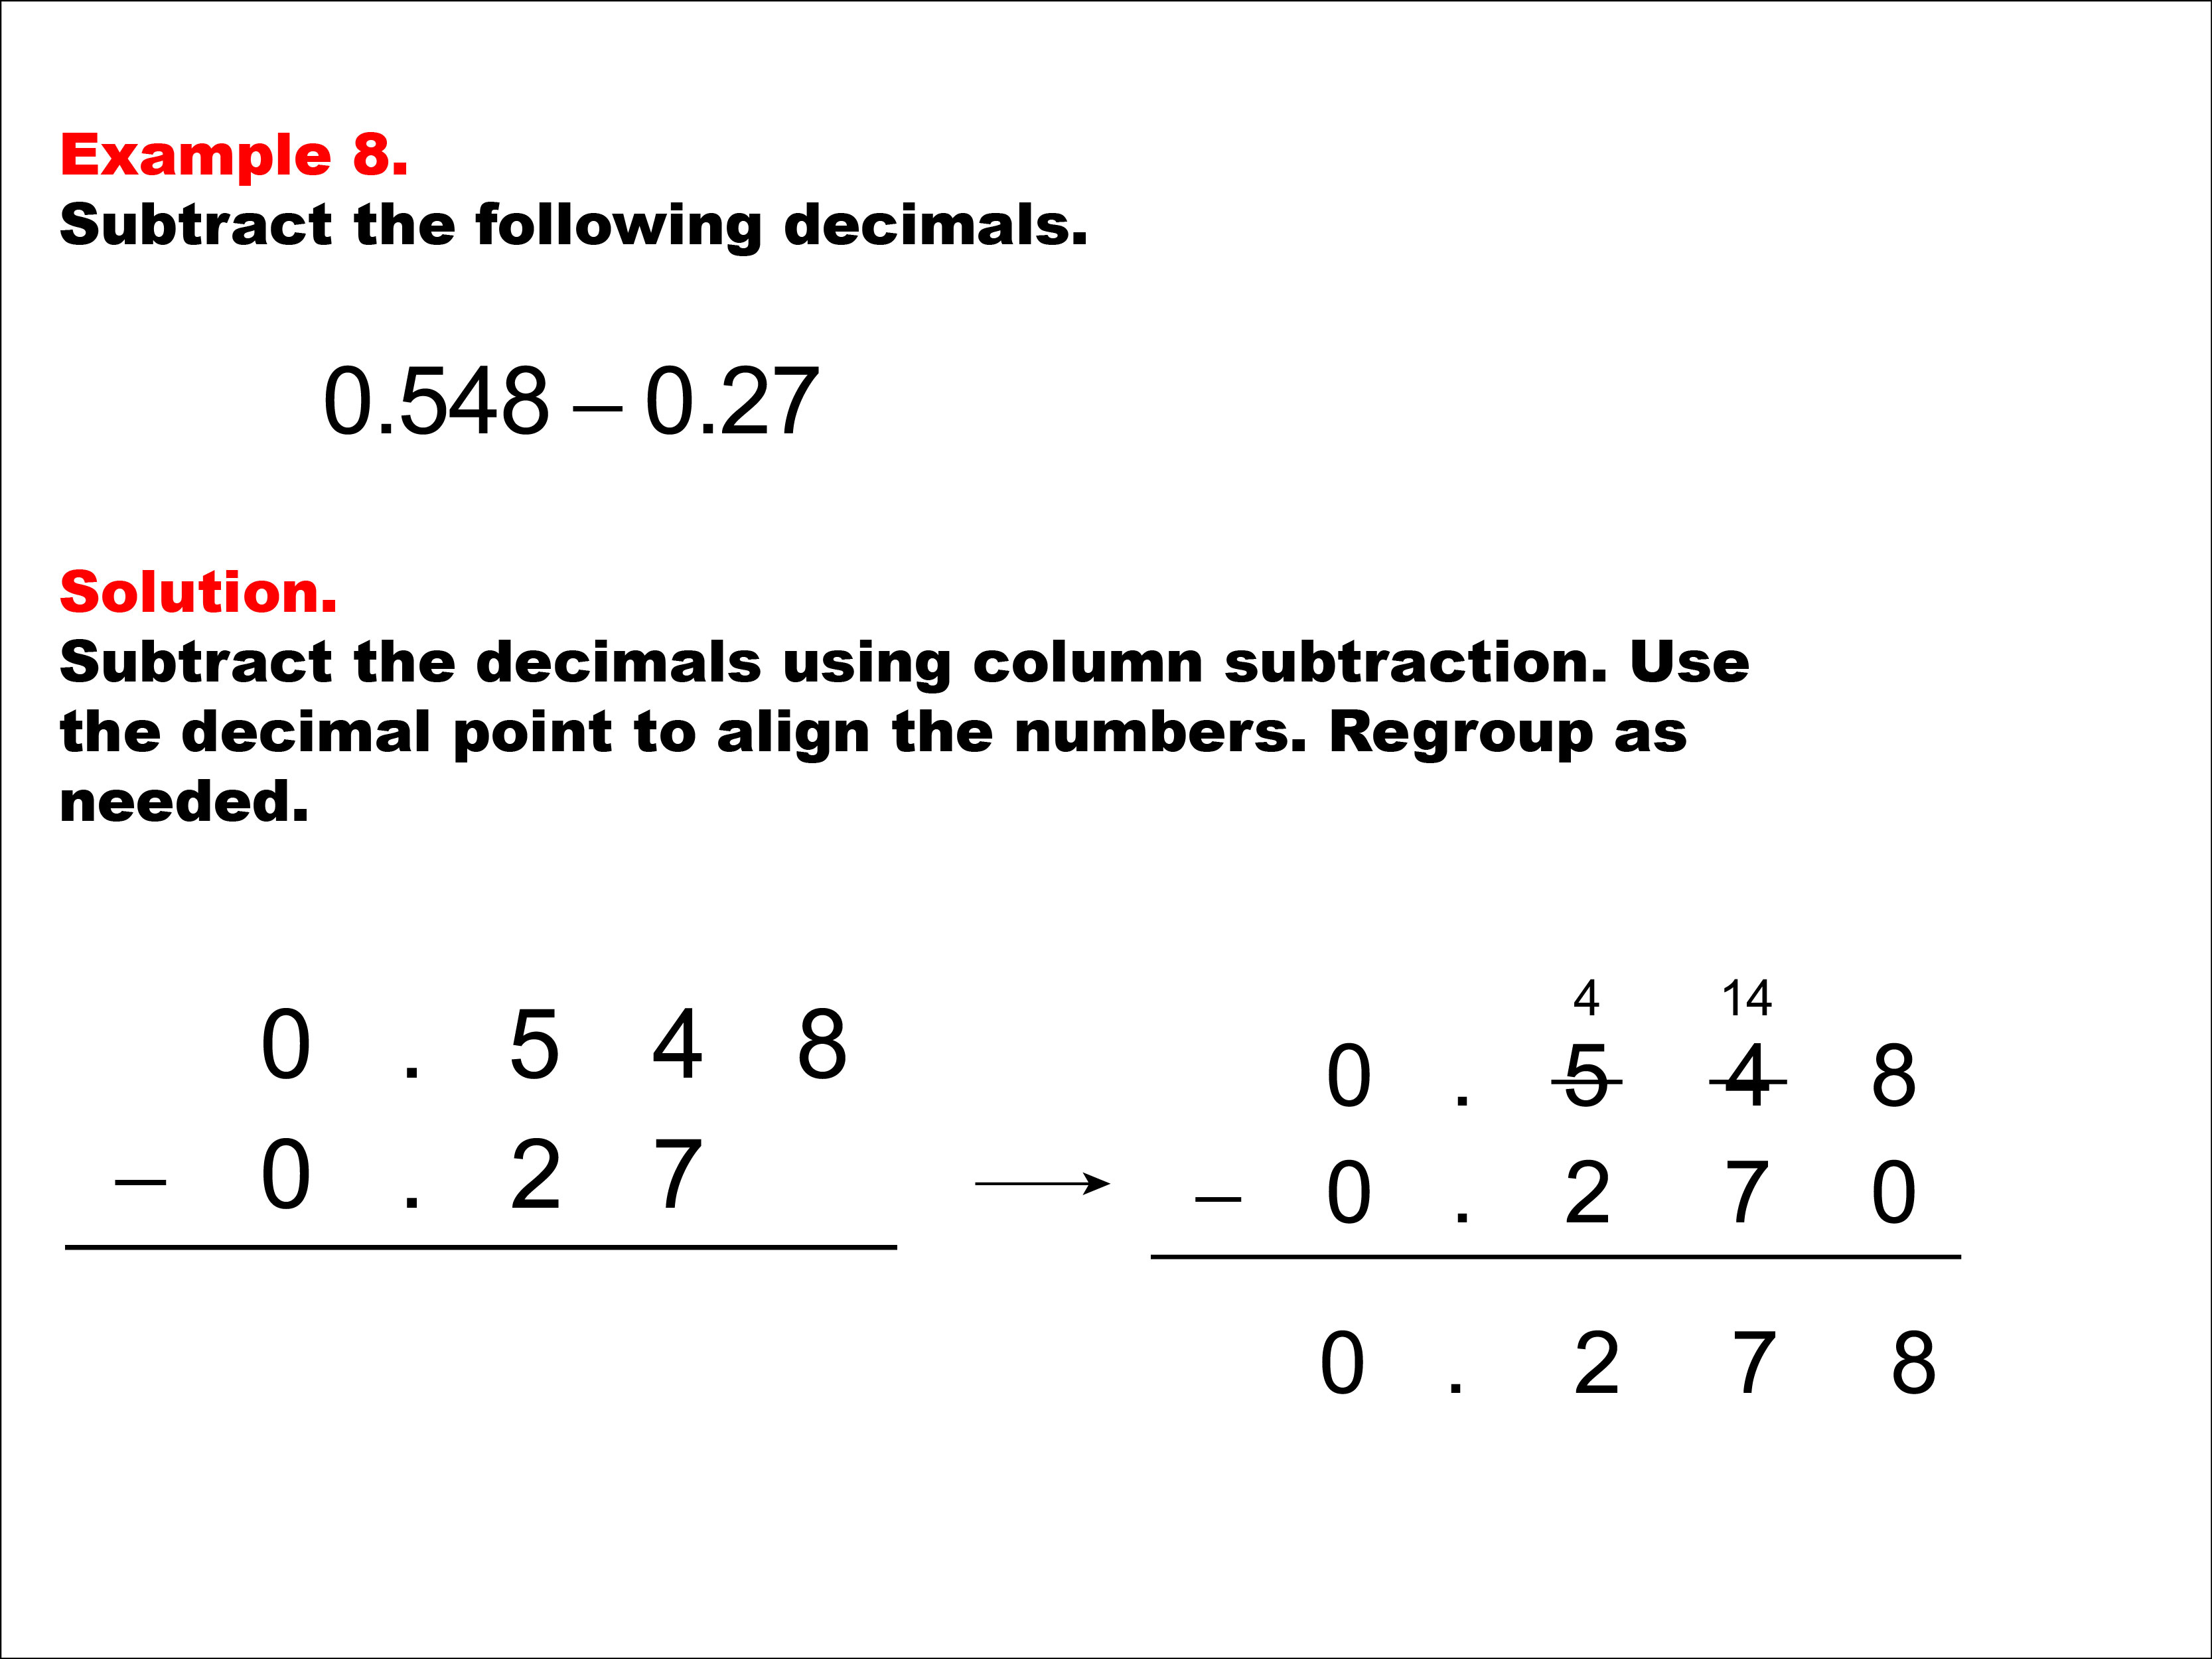 Subtracting Decimals: Example 8. Subtracting two decimals, one to the hundredths place and the other to the tenths place, with regrouping. The numbers have azero in the ones place.To see the complete collection of Math Examples on this topic, click on this link: https://bit.ly/2LQJG30